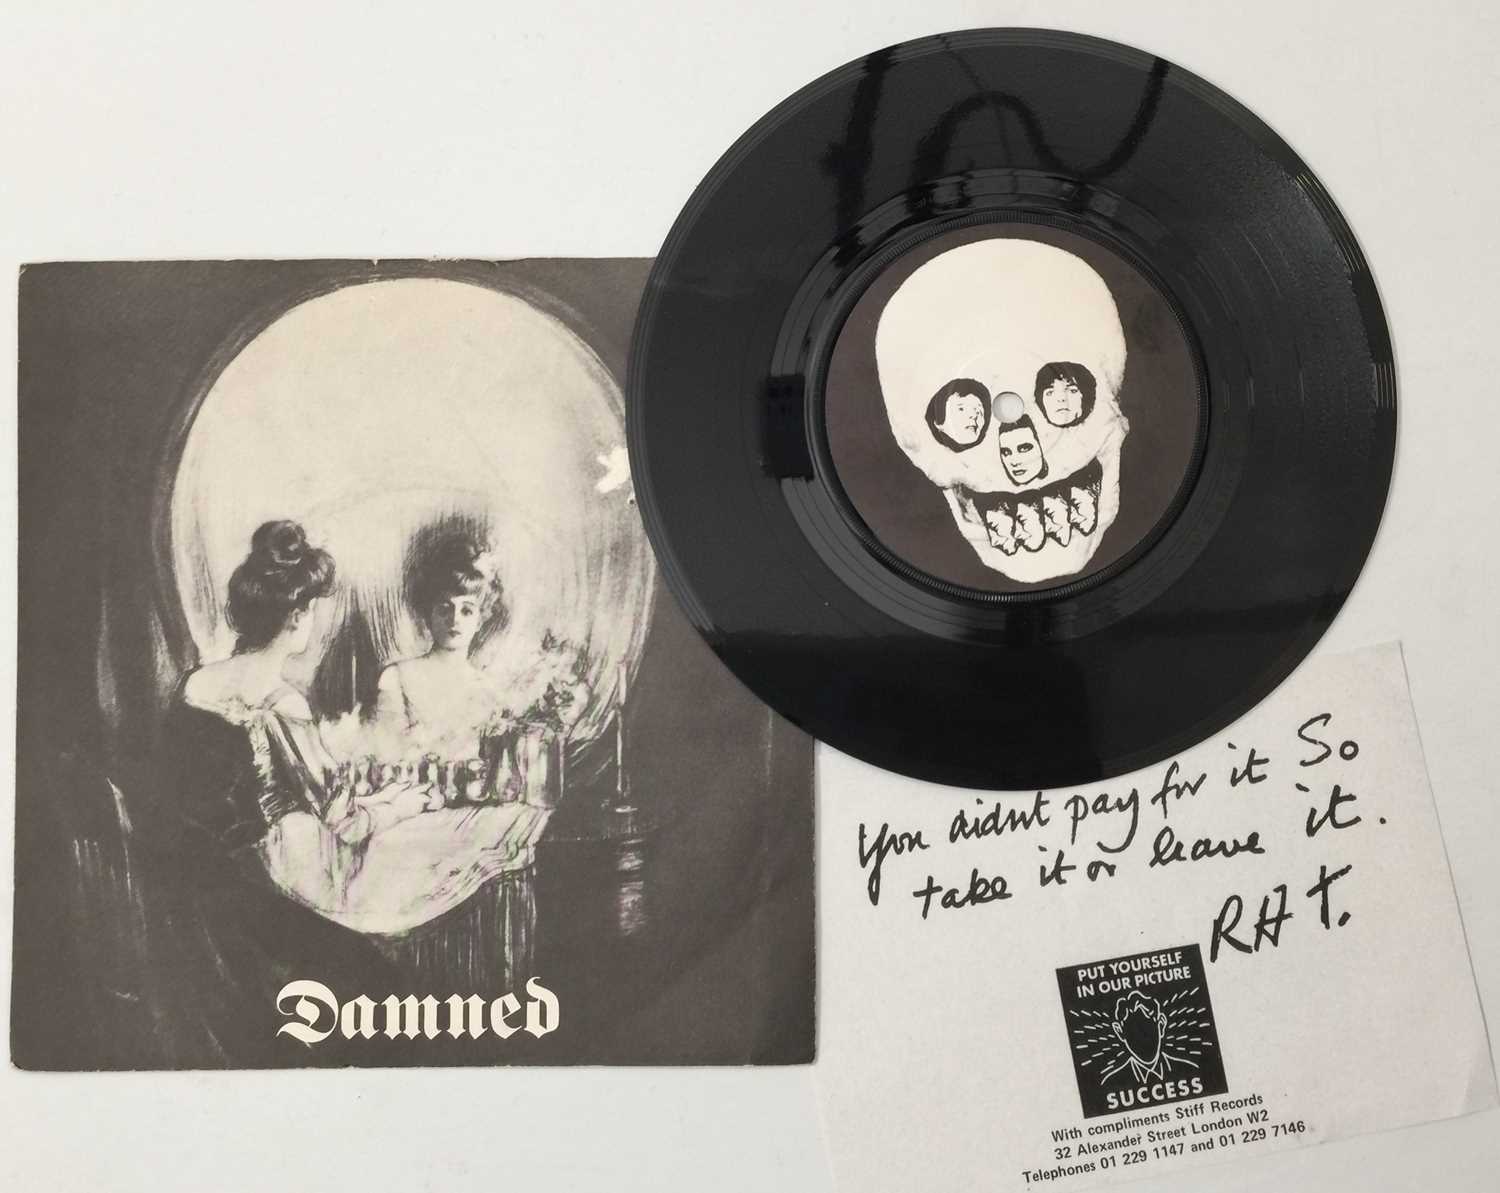 Lot 247 - THE DAMNED - STRETCHER CASE BABY 7" (UK STOCK COPY W/ COMPLIMENT SLIP - STIFF RECORDS)